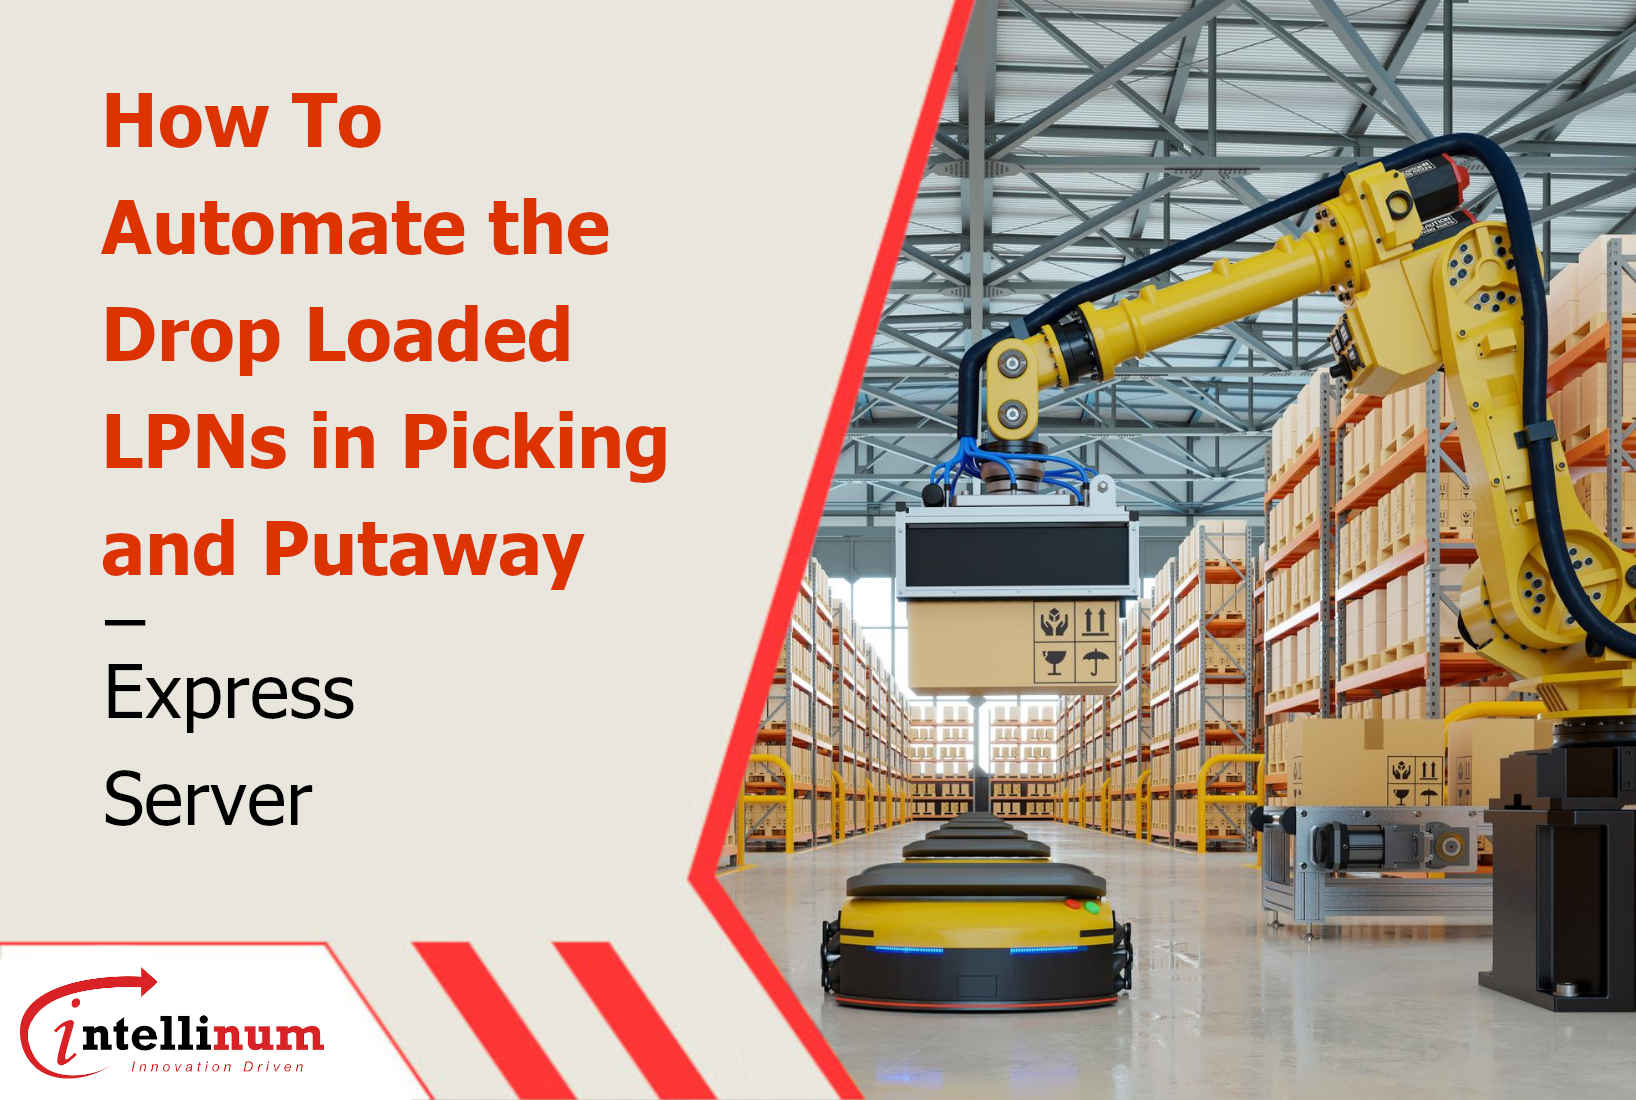 How To Automate the Drop Loaded LPNs in Picking and Putaway